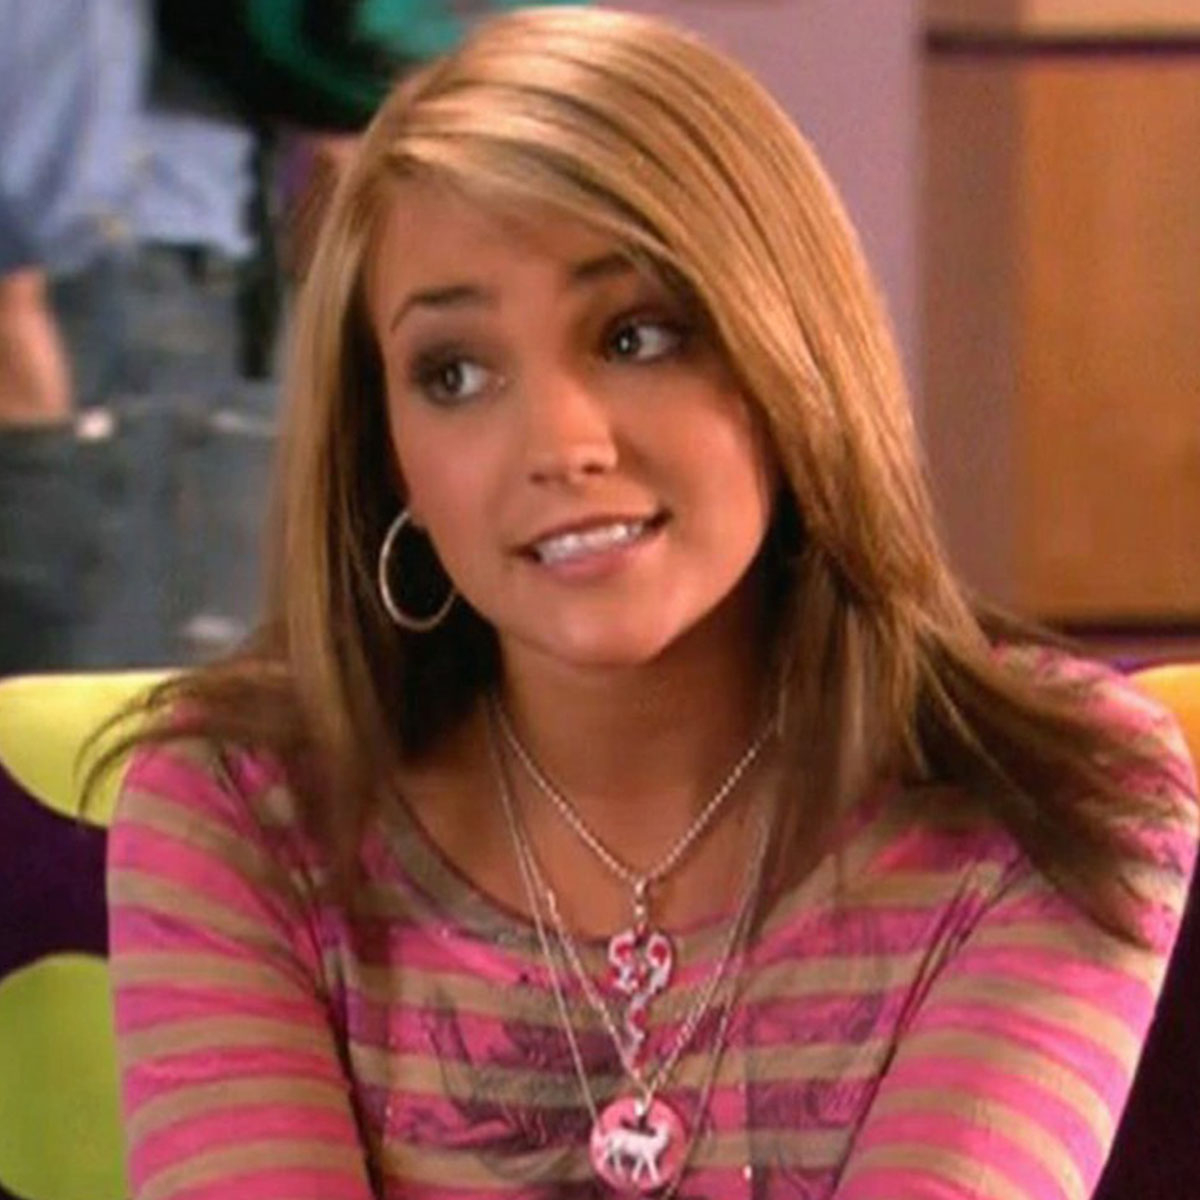 Zoey 101 Cast Porn - Zoey 102: Jamie Lynn Spears Back for More Zoey 101 - E! Online